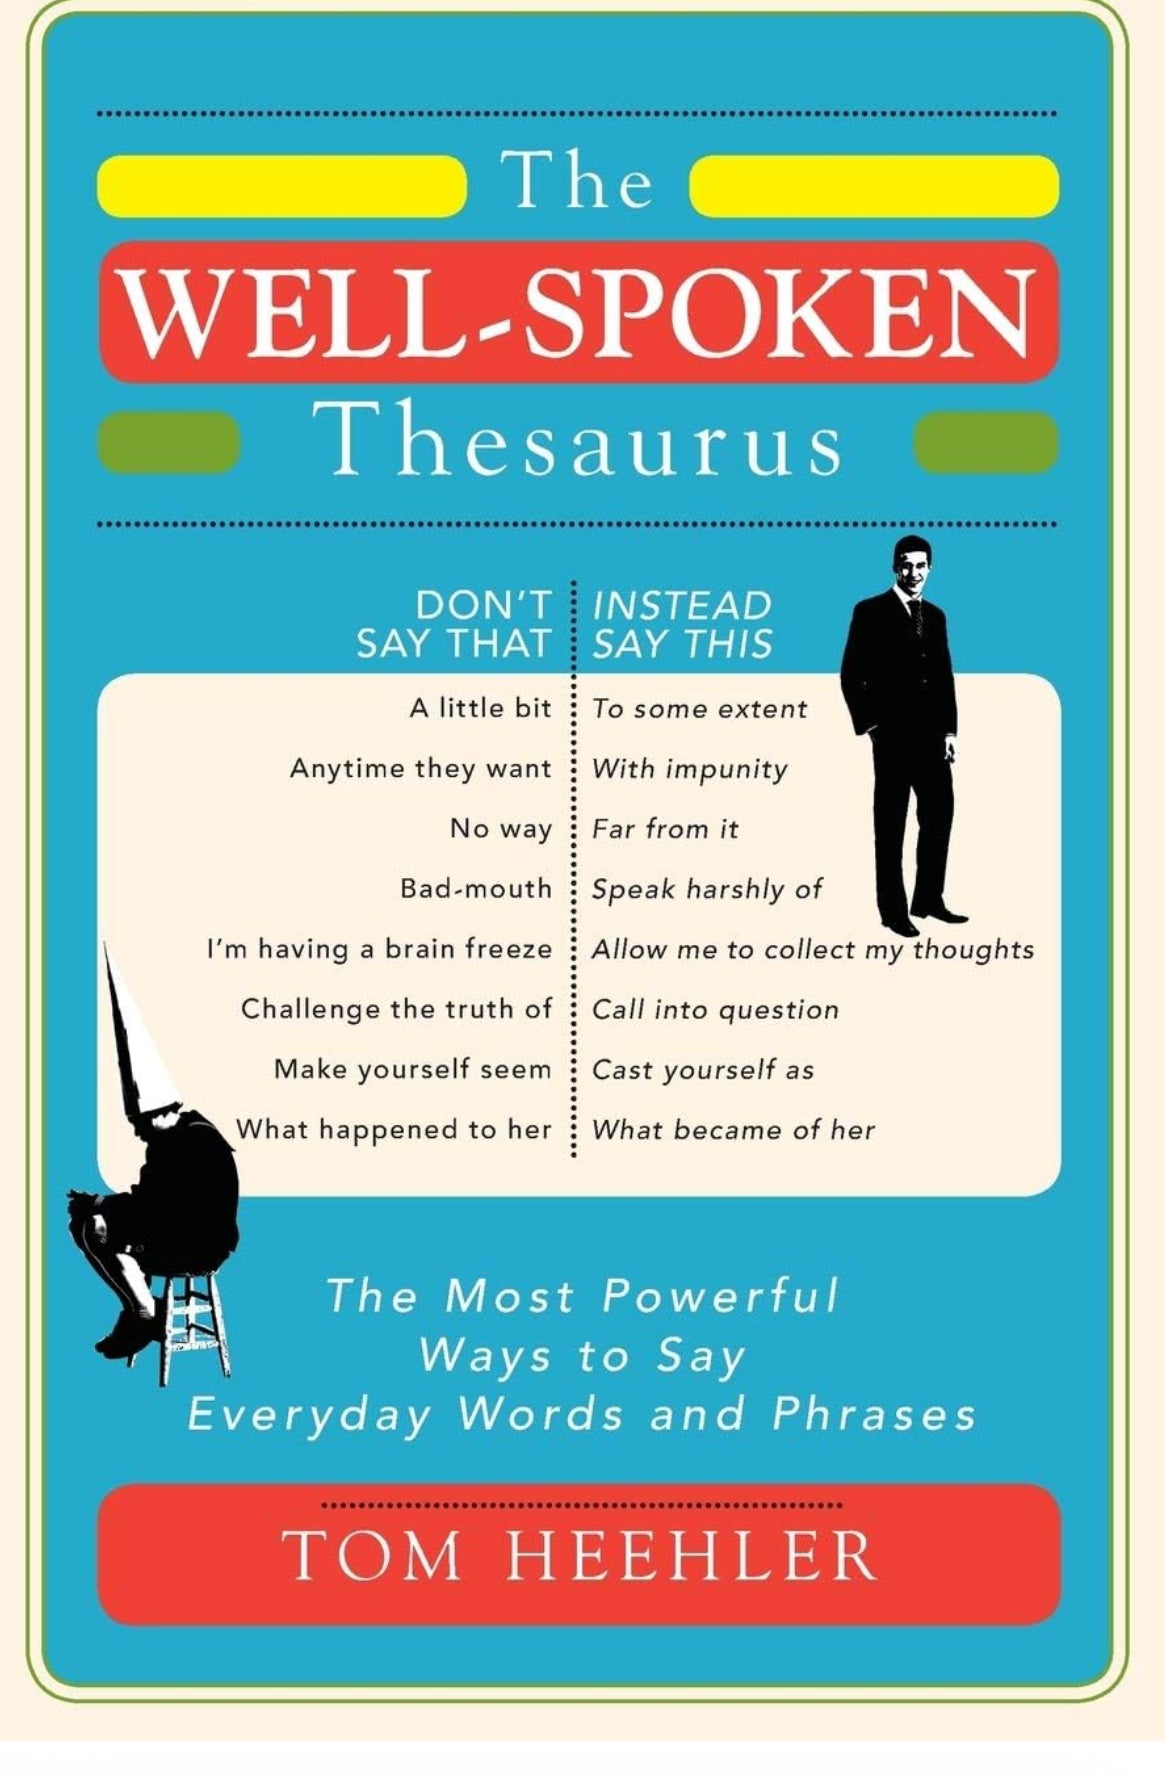 The Well-Spoken Thesaurus: The Most Powerful Ways to Say Everyday Words and Phrases (A Vocabulary Builder for Adults to Improve Your Writing and Speaking Communication Skills) by Tom Heehler